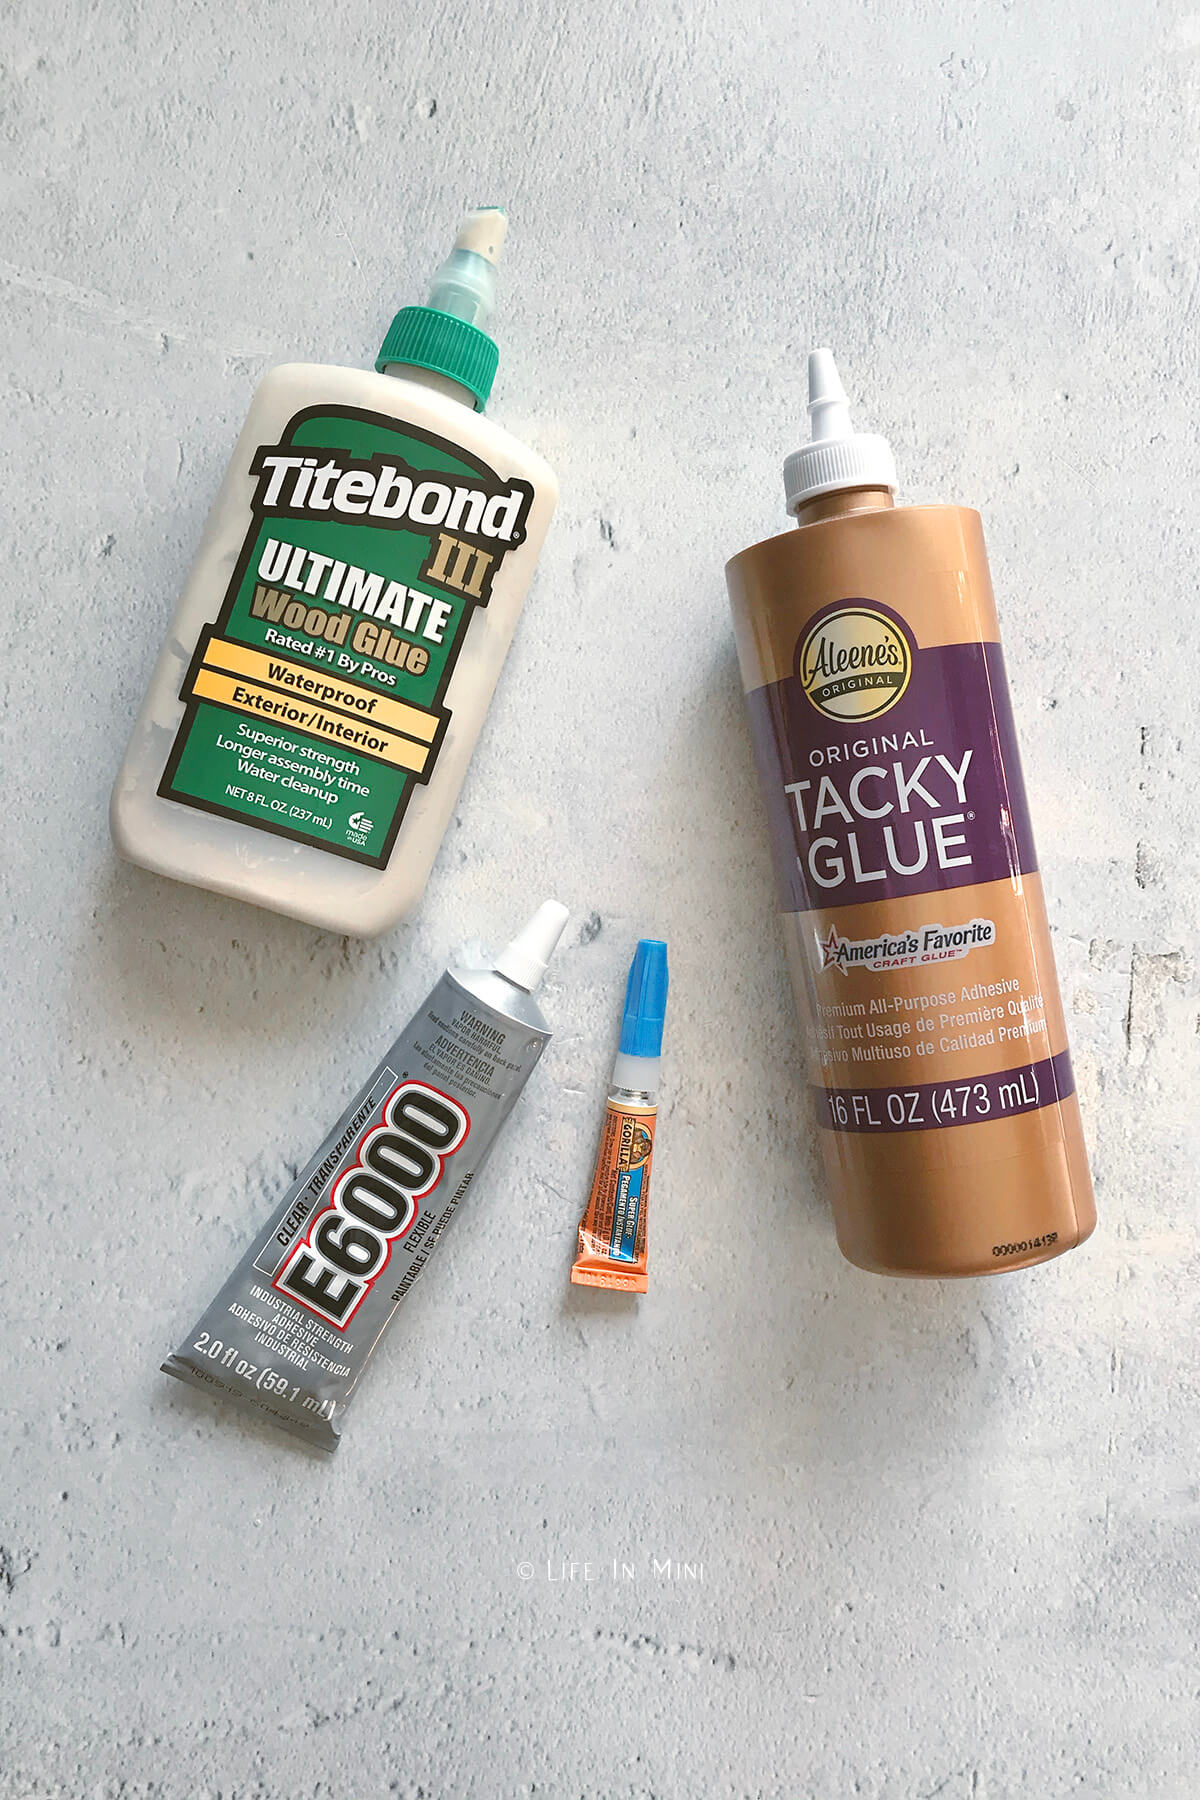 Assortment of glues used in building miniatures and dollhouse accessories